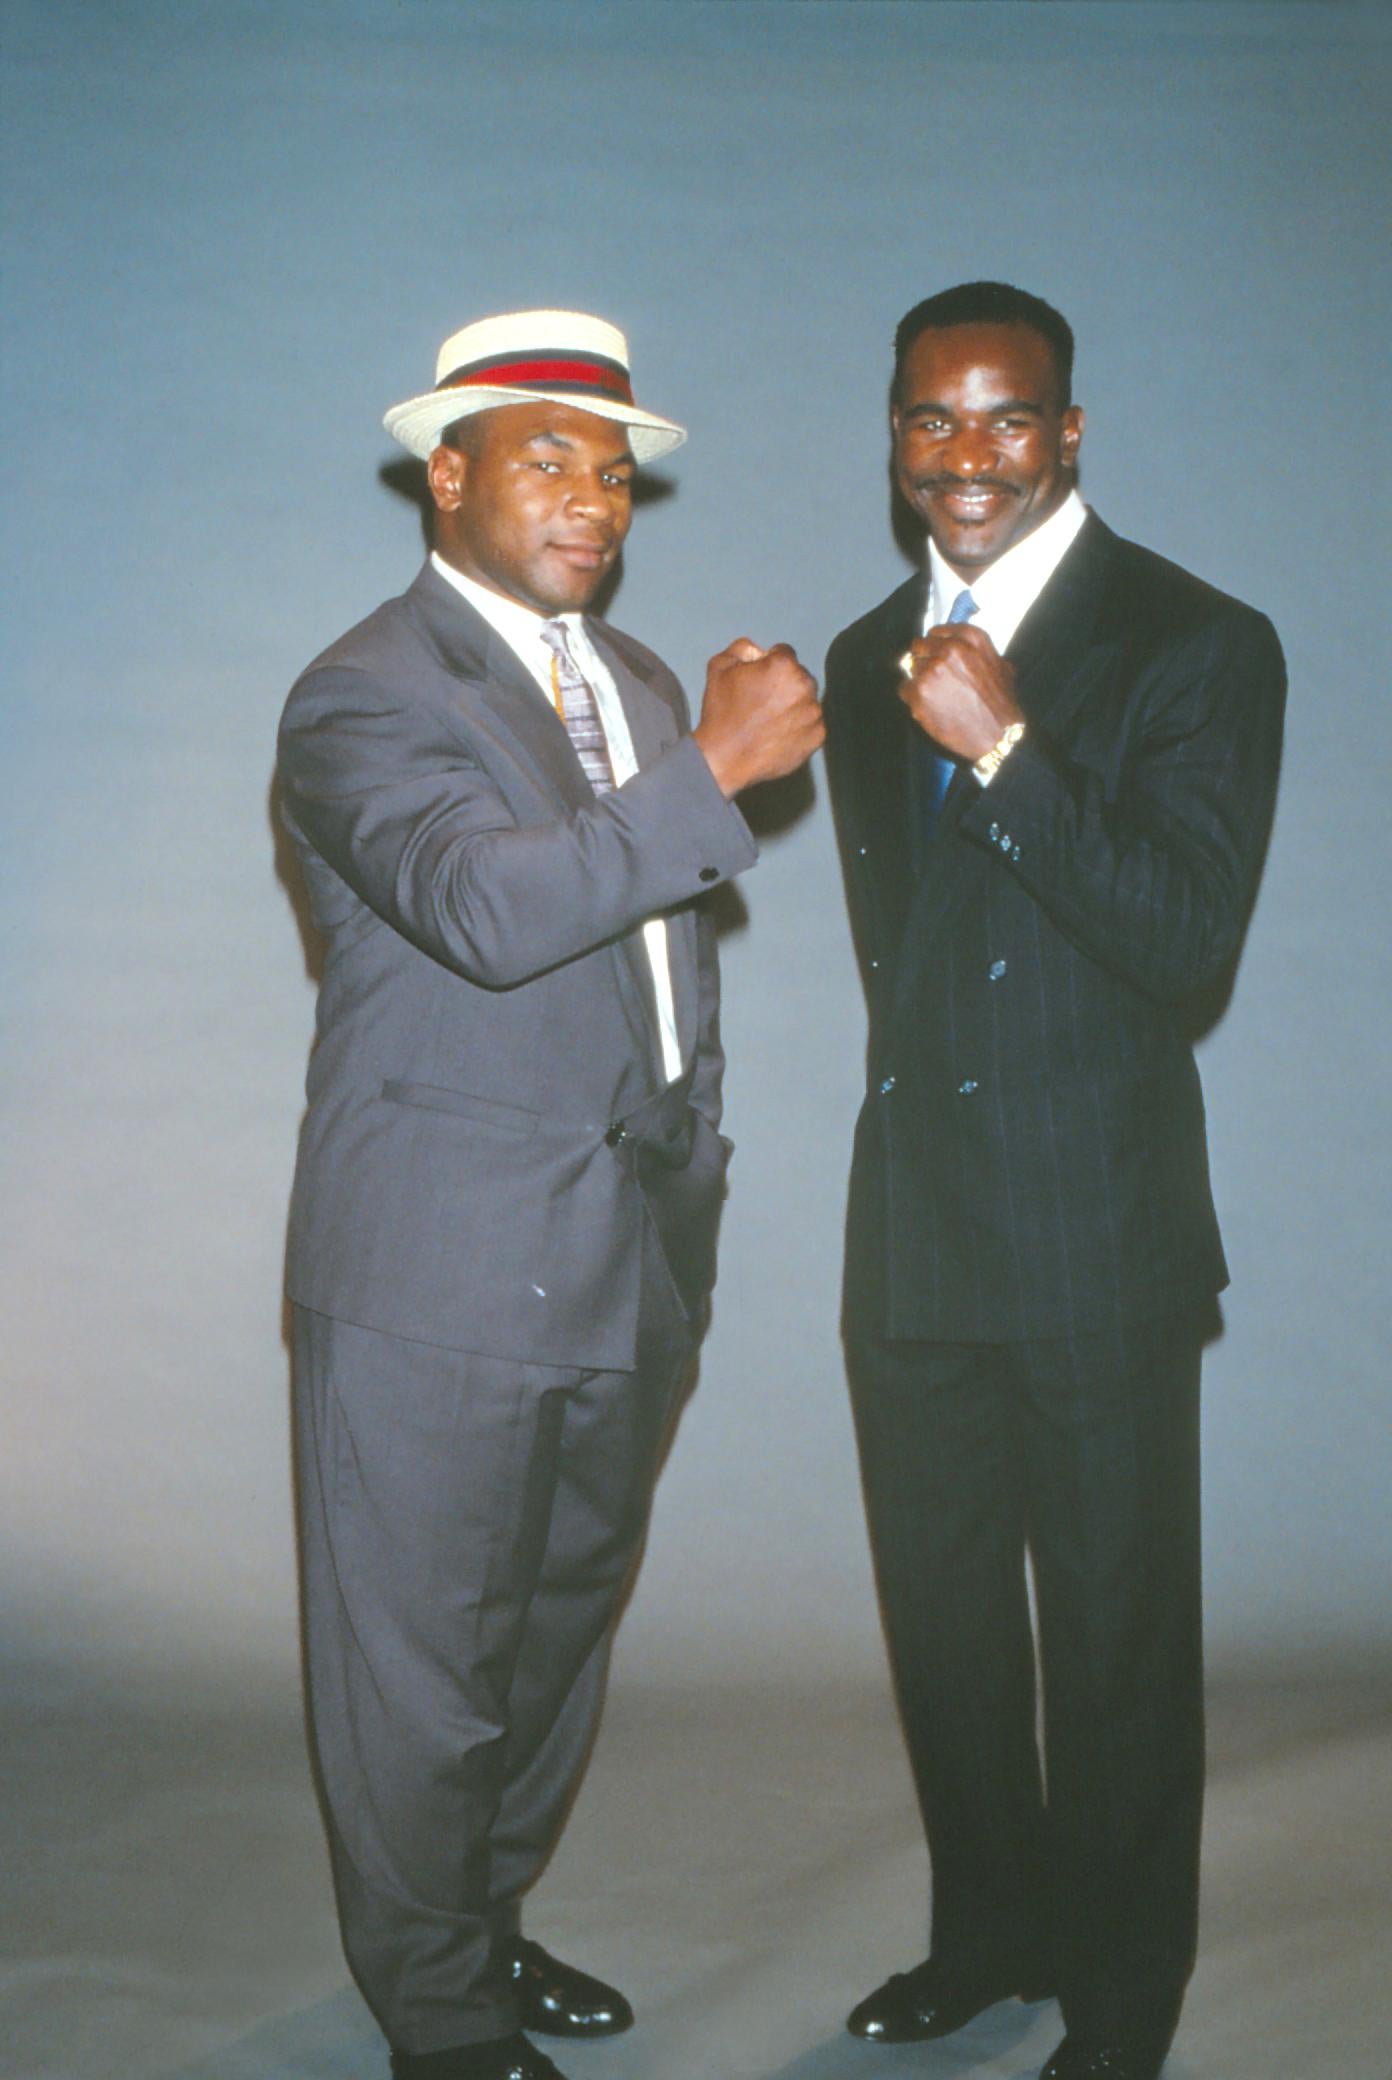 Frank Lee (photographer) Color Photograph - Mike Tyson and Evander Holyfield: Heavyweight Champions Fine Art Print